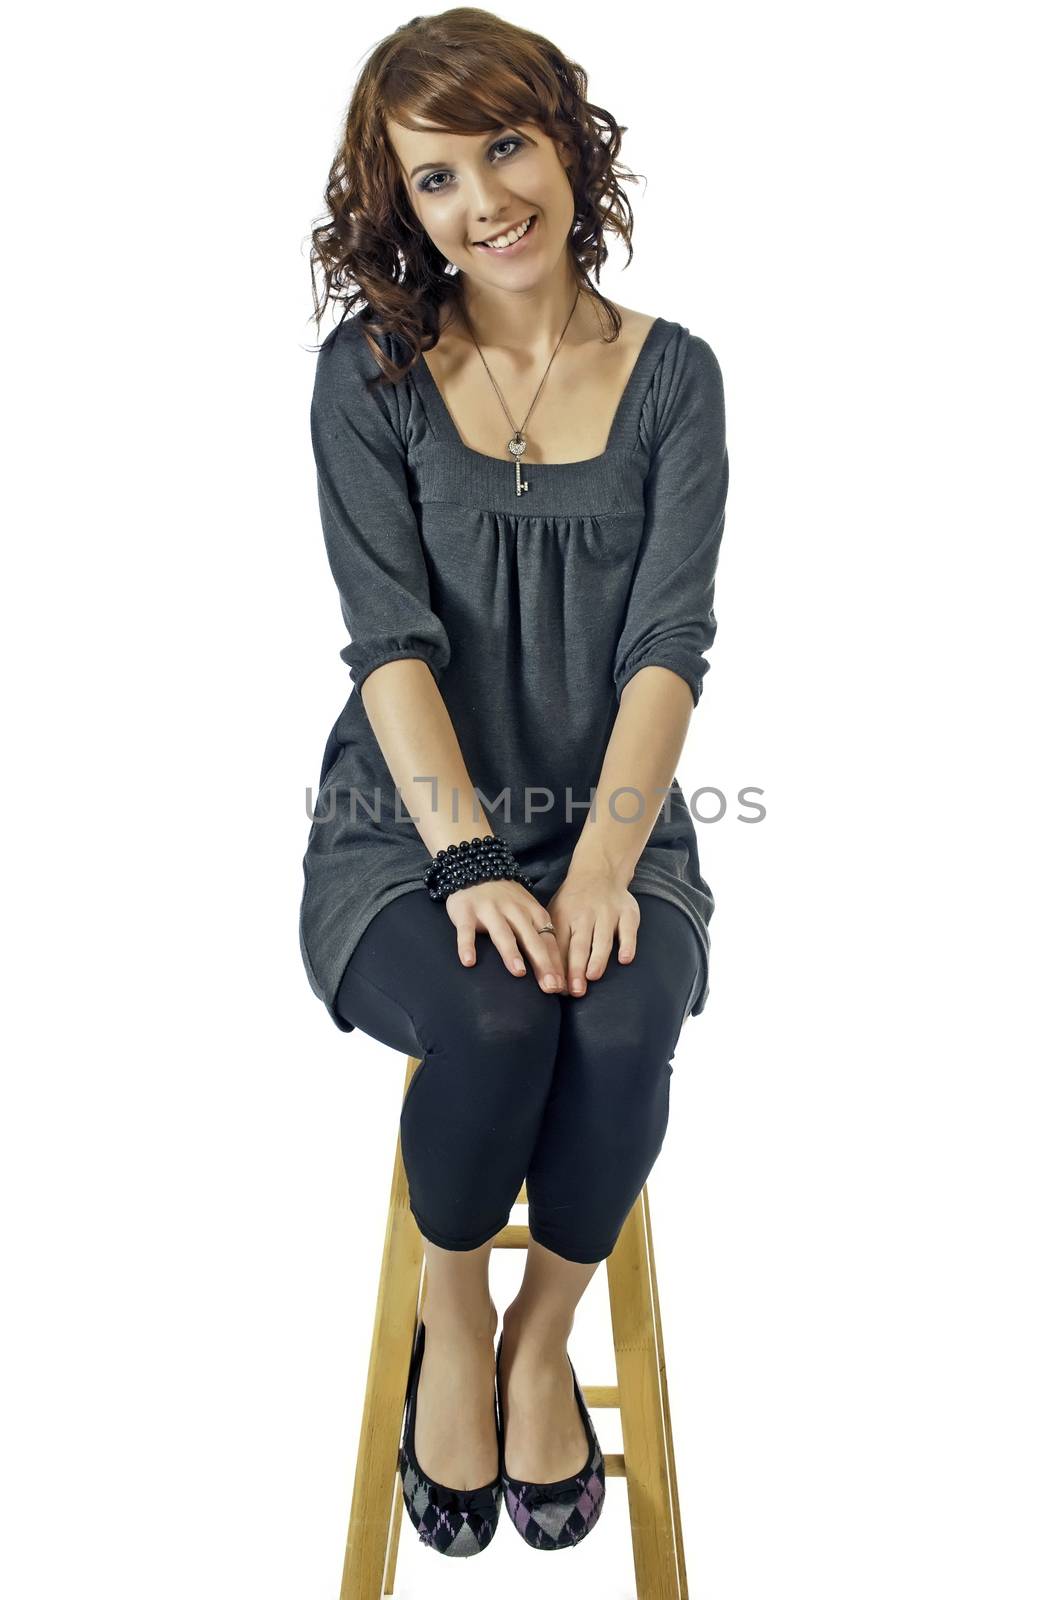 Smiling girl seated on a stool during an interview or audition for a movie part.